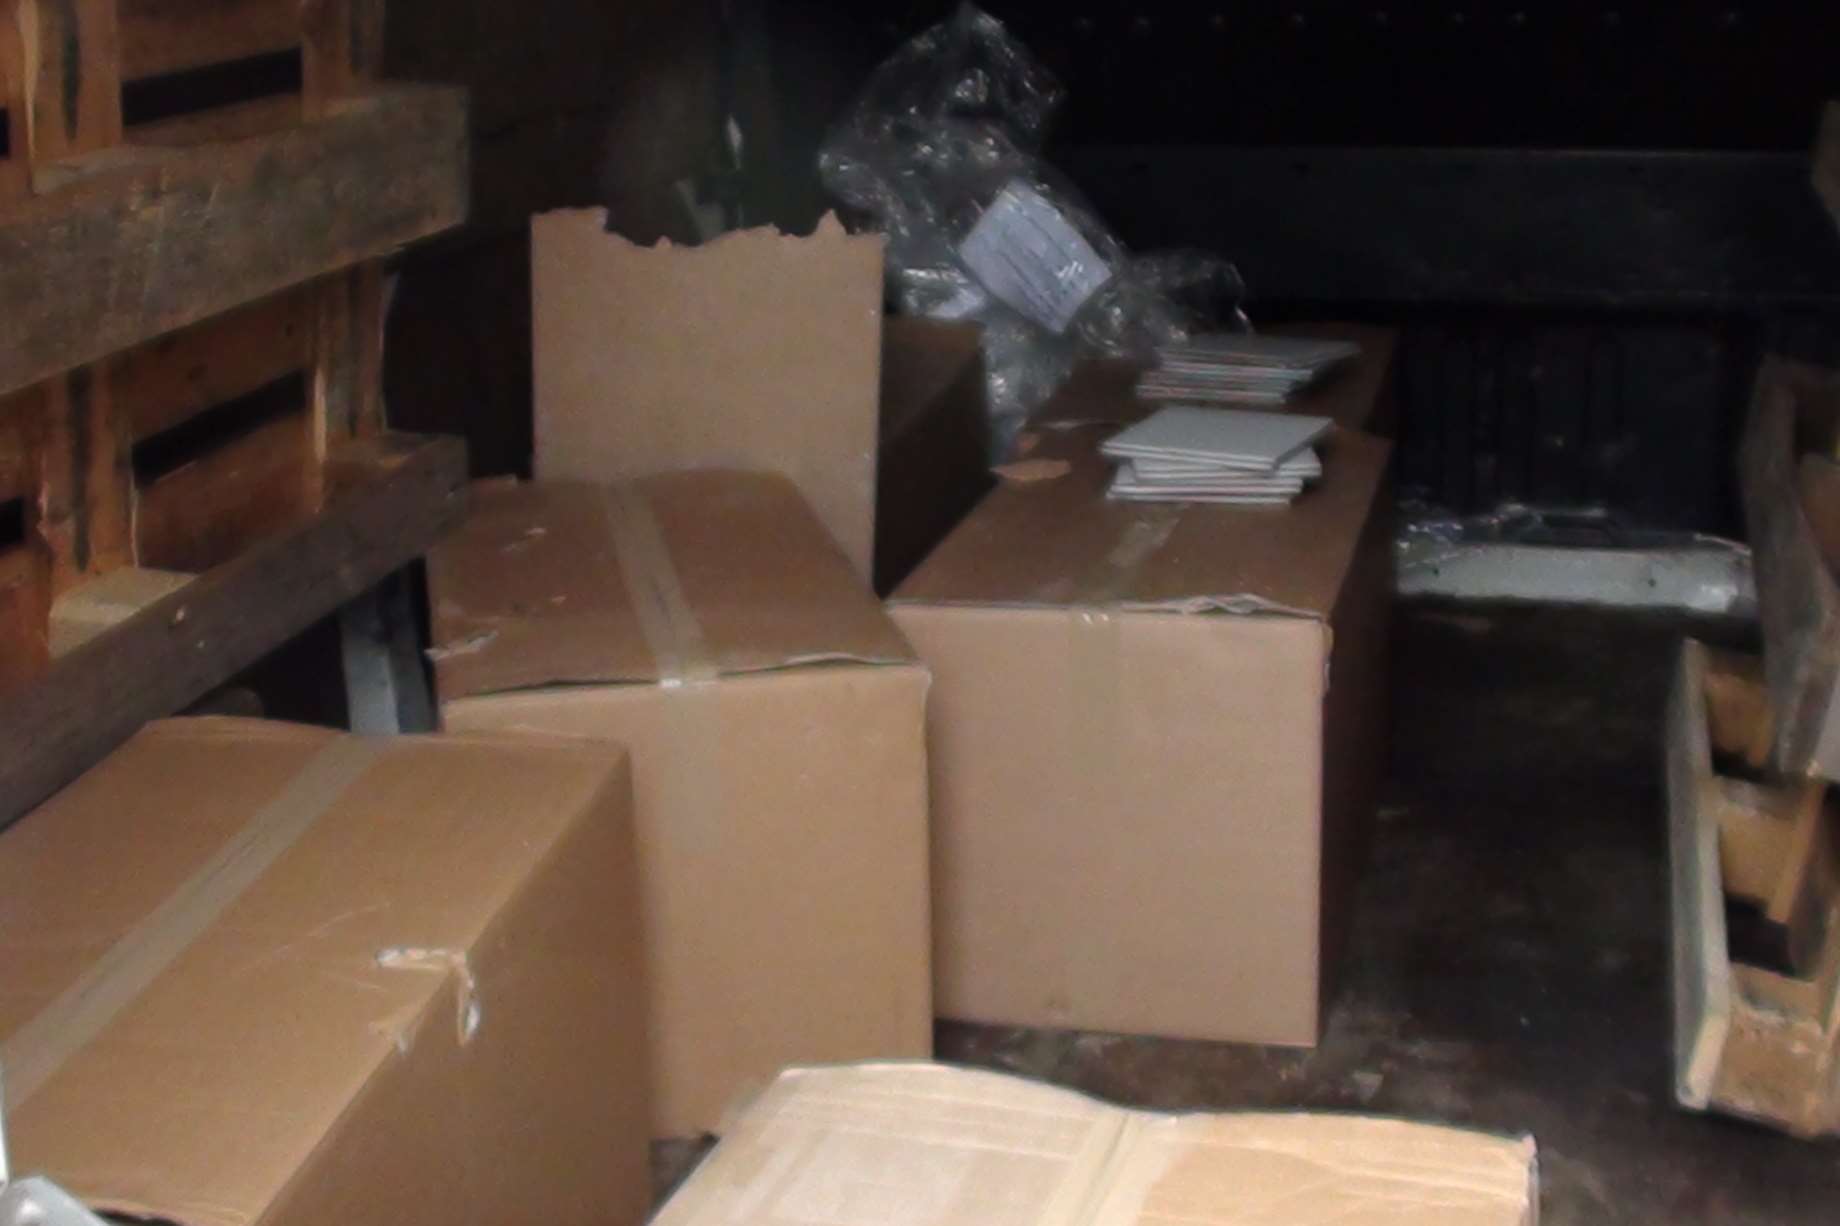 Another 150 kilos of cannabis was found in another garage in the same row.